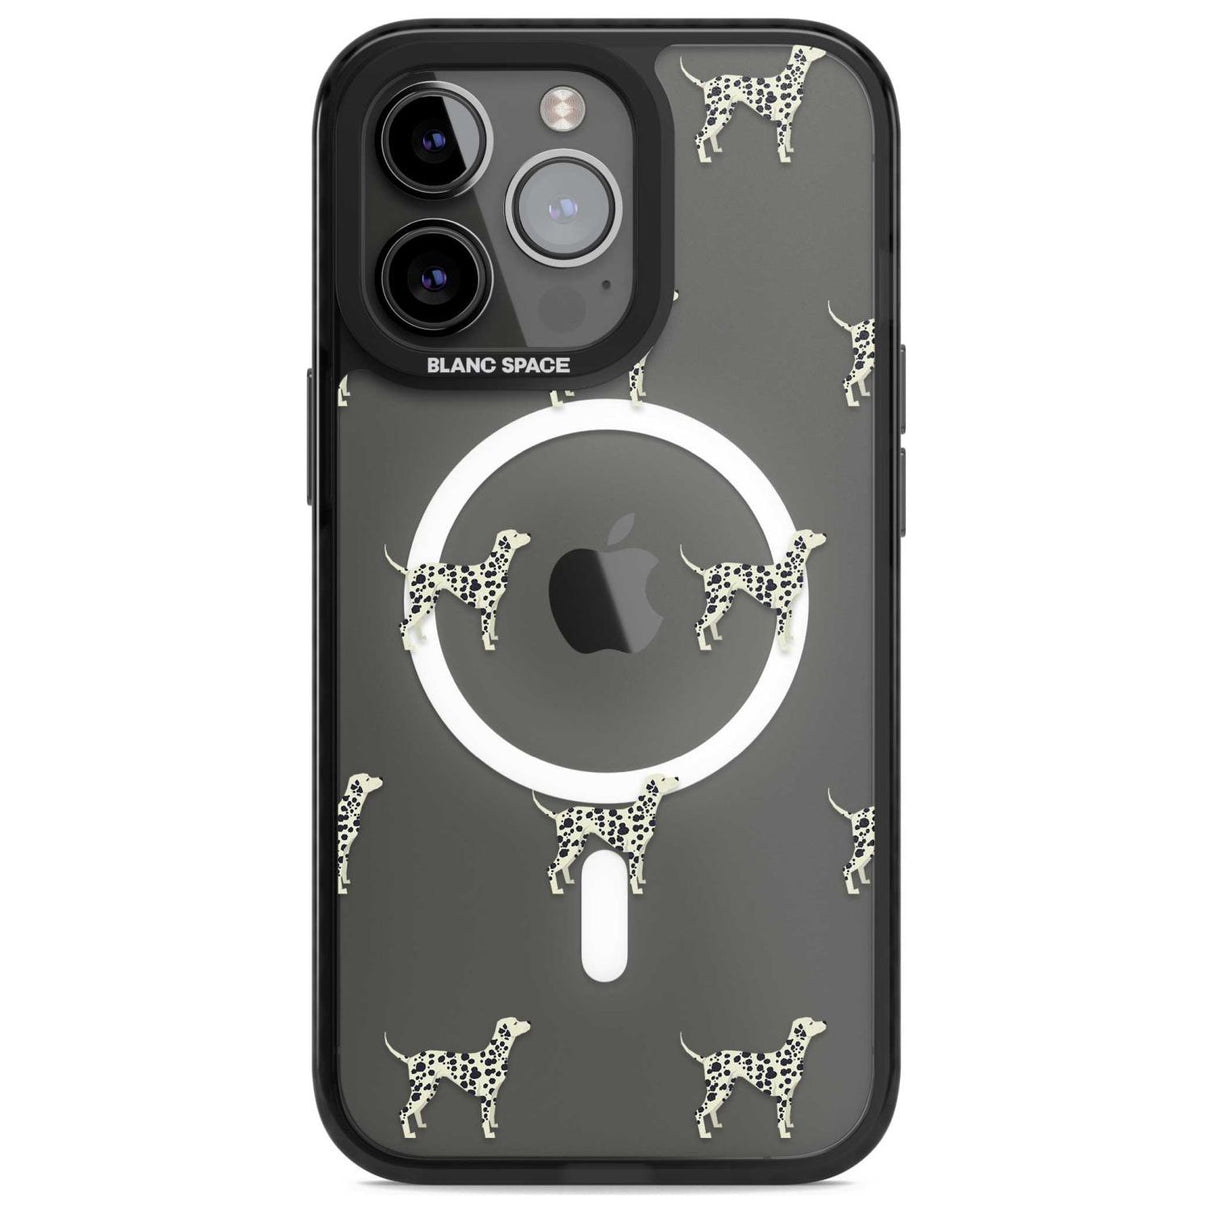 Dalmation Dog Pattern Clear Phone Case iPhone 15 Pro Max / Magsafe Black Impact Case,iPhone 15 Pro / Magsafe Black Impact Case,iPhone 14 Pro Max / Magsafe Black Impact Case,iPhone 14 Pro / Magsafe Black Impact Case,iPhone 13 Pro / Magsafe Black Impact Case Blanc Space